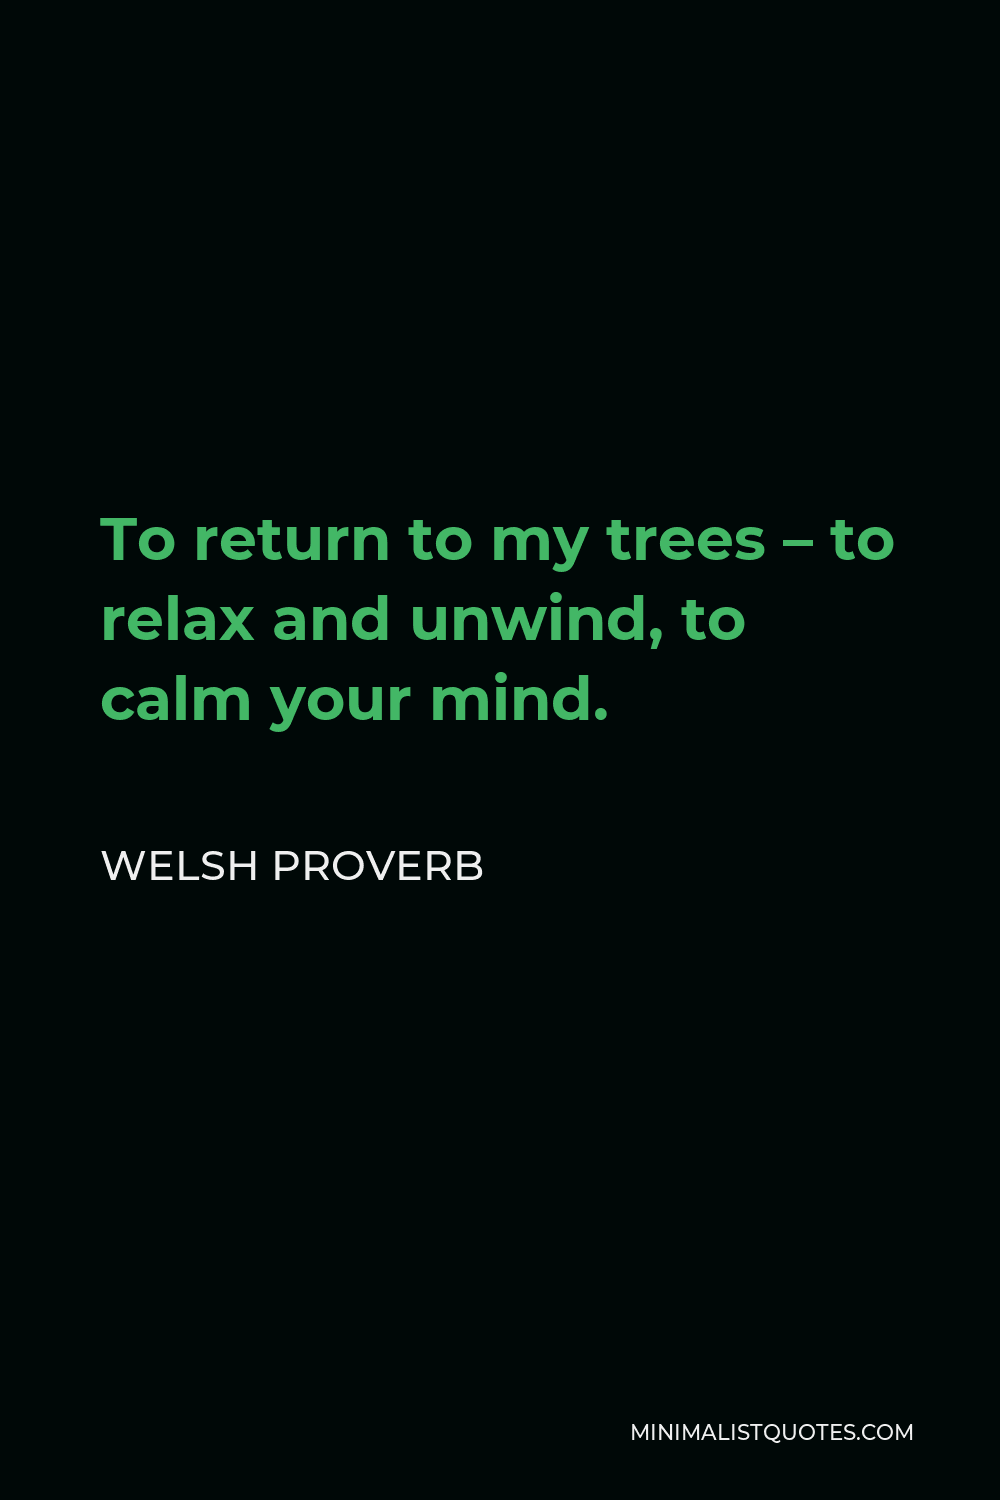 Welsh Proverb Quote - To return to my trees – to relax and unwind, to calm your mind.